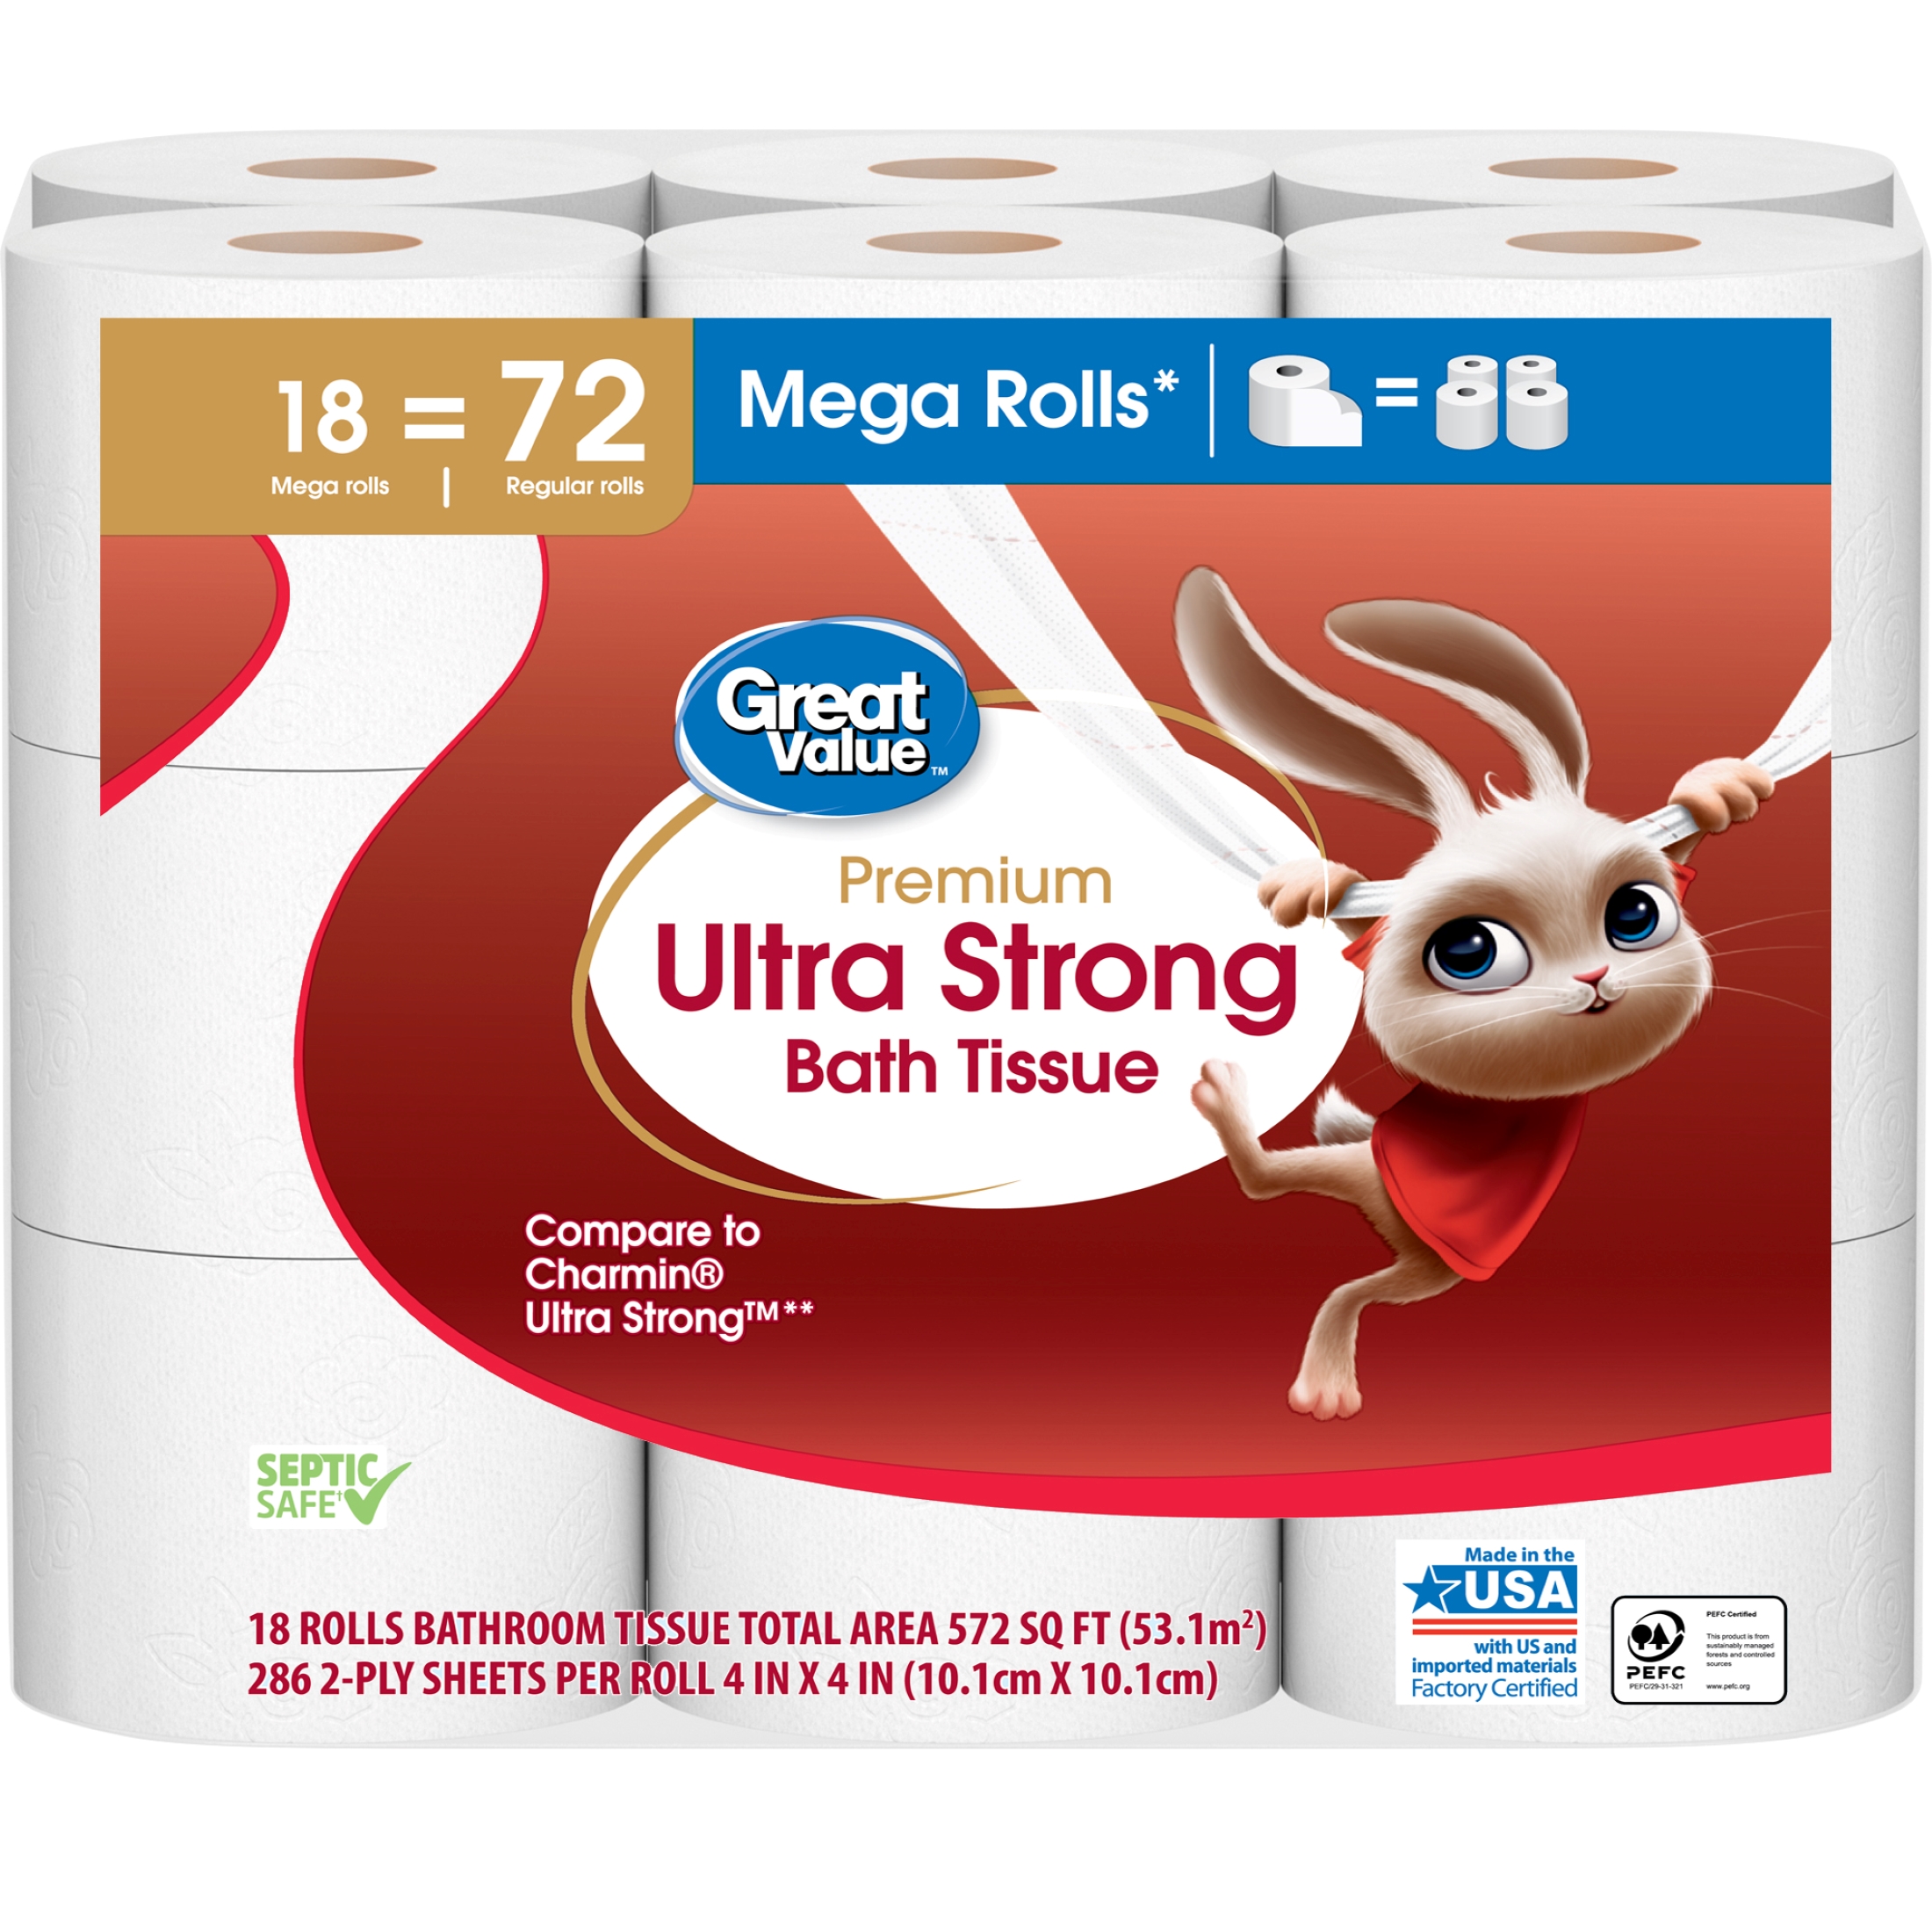 Great Value Ultra Strong Toilet Paper, 18 Mega Rolls - image 2 of 10